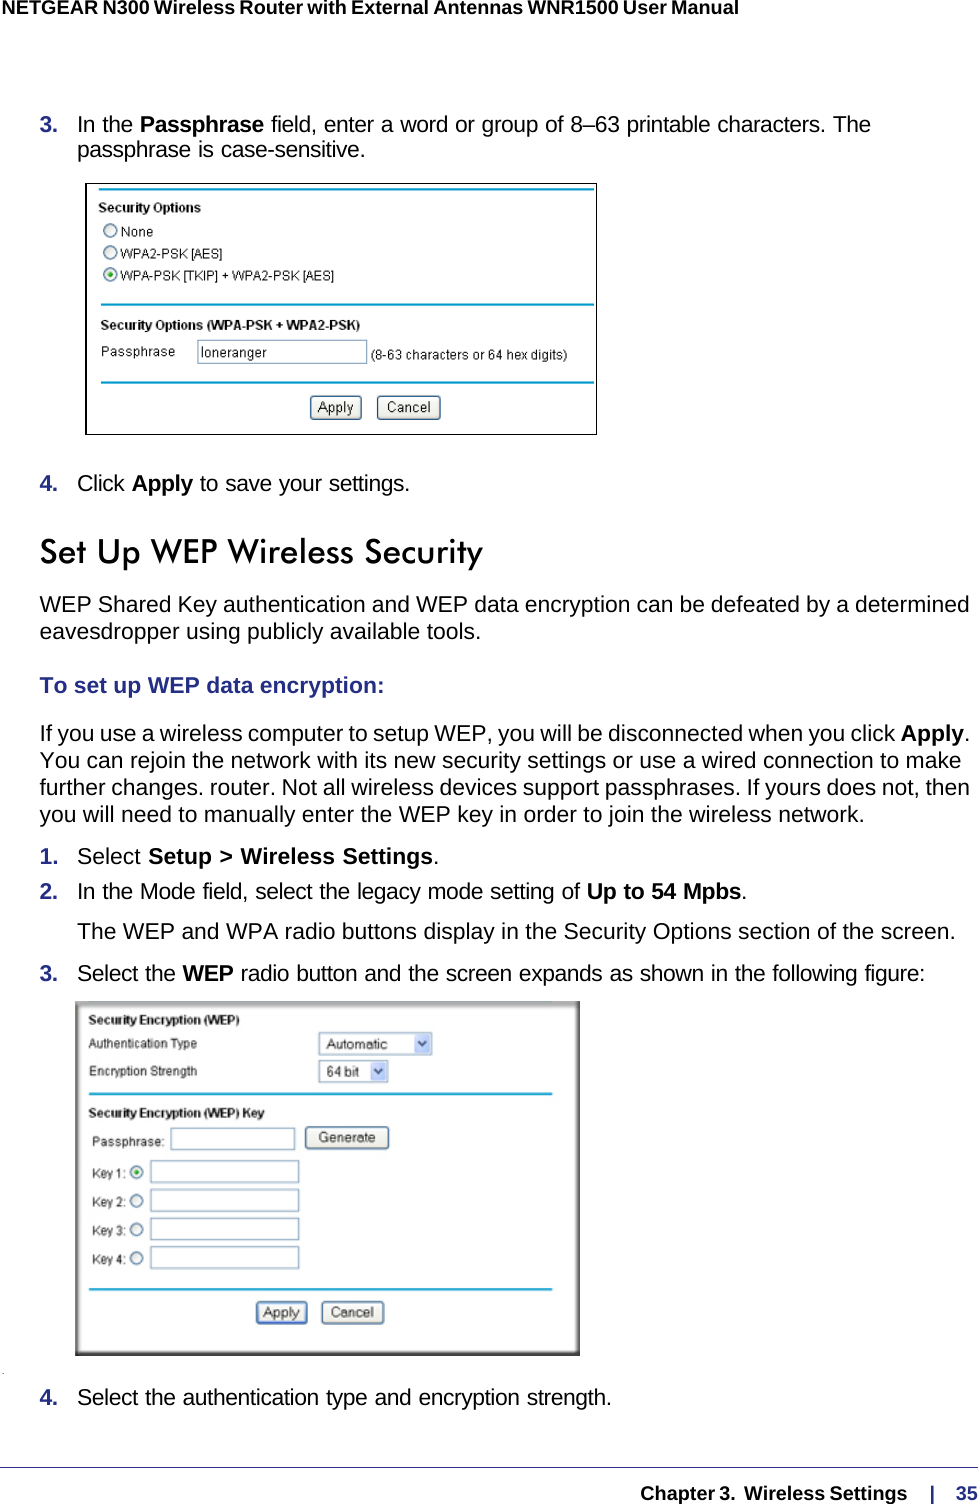   Chapter 3.  Wireless Settings     |    35NETGEAR N300 Wireless Router with External Antennas WNR1500 User Manual 3.  In the Passphrase field, enter a word or group of 8–63 printable characters. The passphrase is case-sensitive.4.  Click Apply to save your settings.Set Up WEP Wireless SecurityWEP Shared Key authentication and WEP data encryption can be defeated by a determined eavesdropper using publicly available tools.To set up WEP data encryption:If you use a wireless computer to setup WEP, you will be disconnected when you click Apply. You can rejoin the network with its new security settings or use a wired connection to make further changes. router. Not all wireless devices support passphrases. If yours does not, then you will need to manually enter the WEP key in order to join the wireless network.1.  Select Setup &gt; Wireless Settings.2.  In the Mode field, select the legacy mode setting of Up to 54 Mpbs.The WEP and WPA radio buttons display in the Security Options section of the screen. 3.  Select the WEP radio button and the screen expands as shown in the following figure:.4.  Select the authentication type and encryption strength.